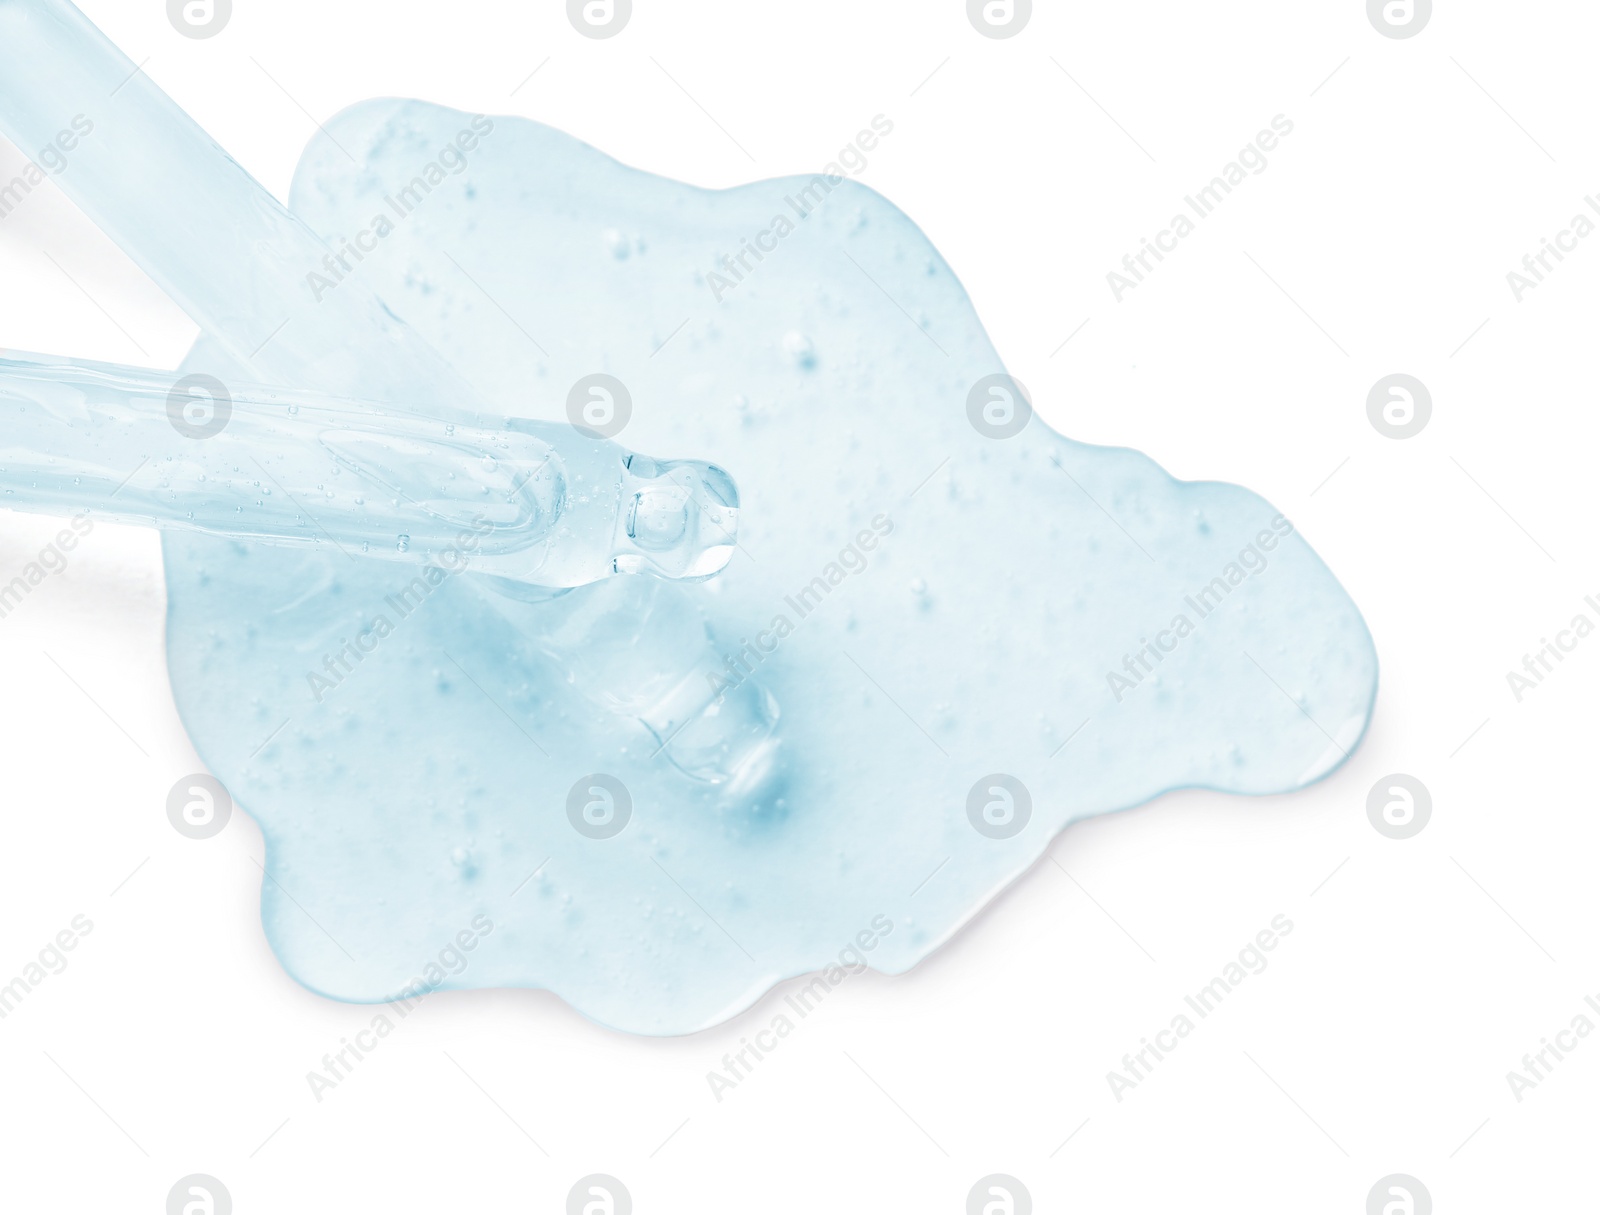 Image of Droppers with serum on white background, top view. Skin care product